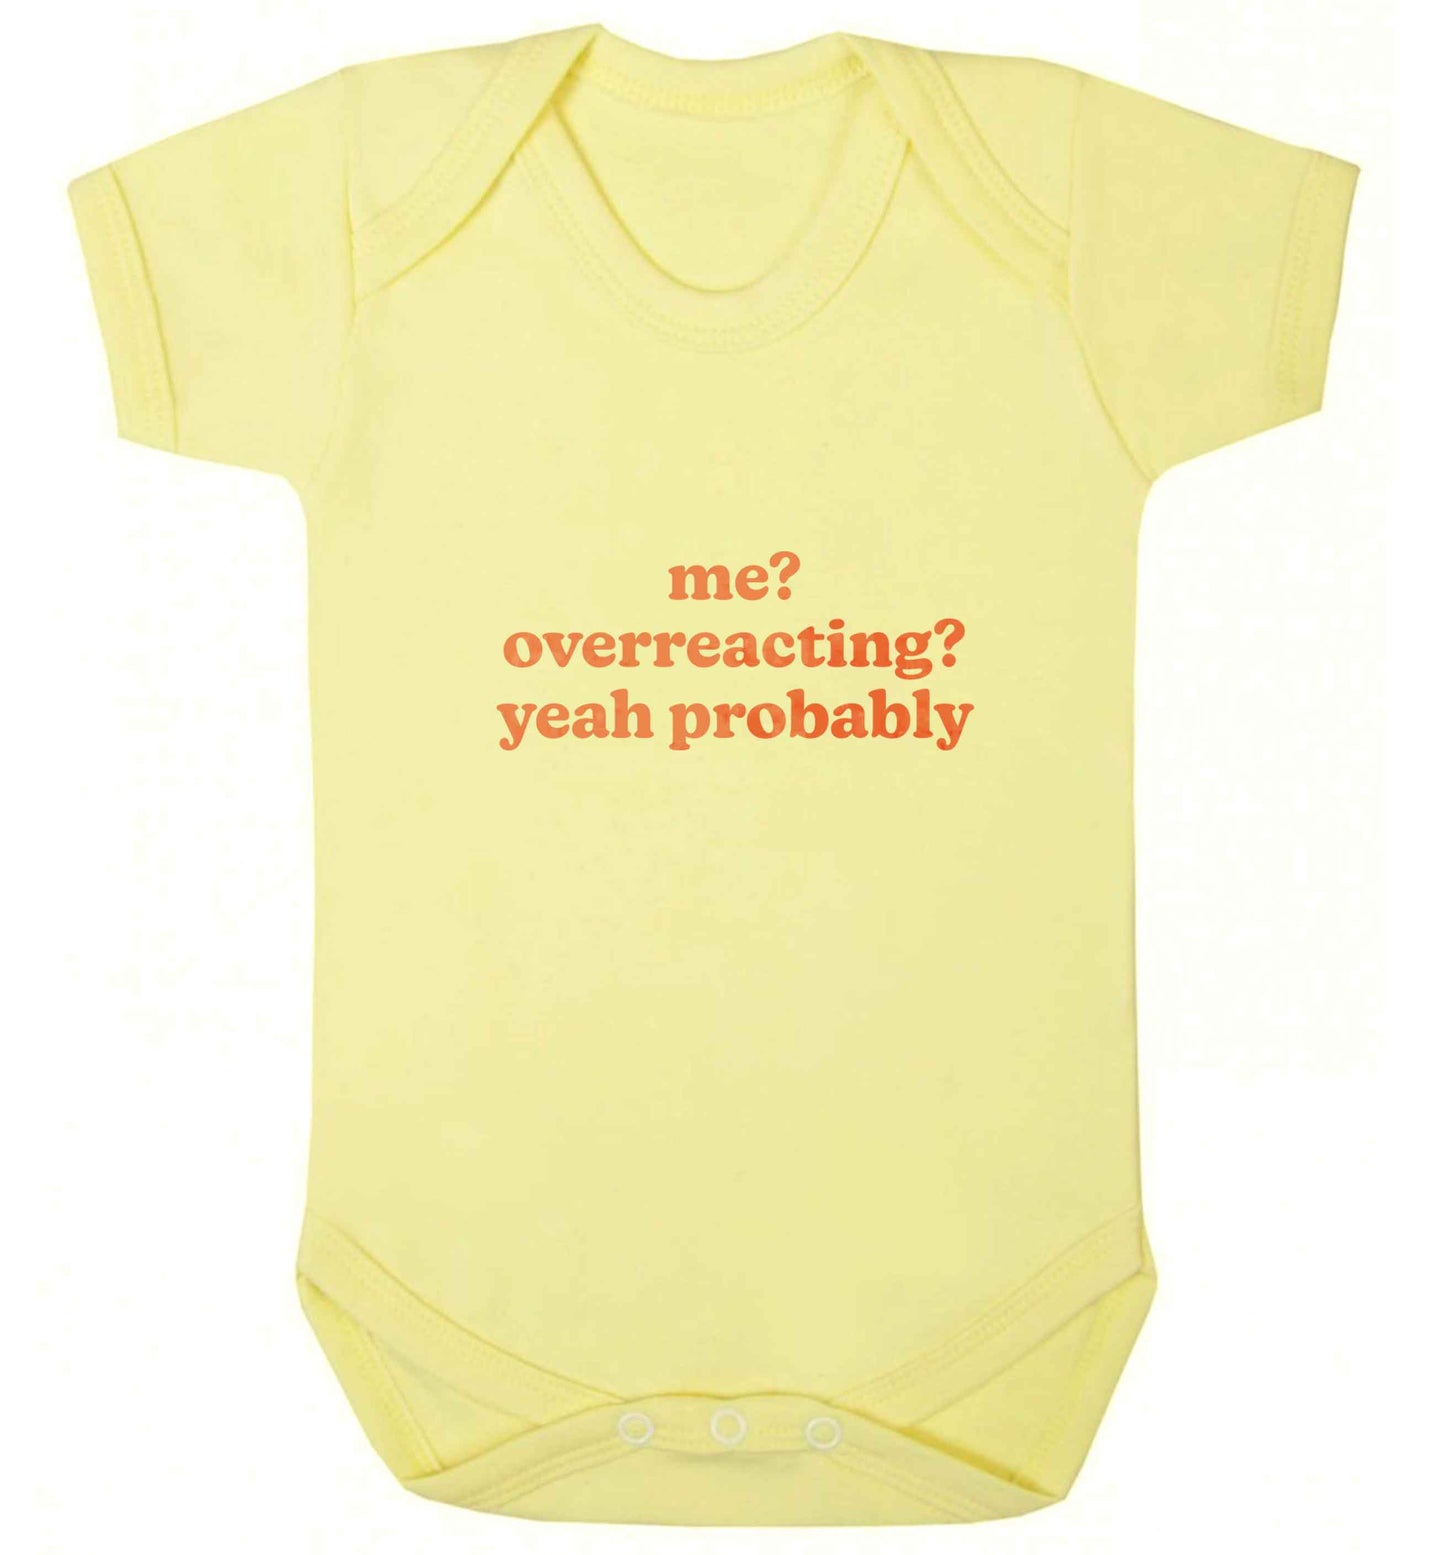 Me? Overreacting? Yeah probably baby vest pale yellow 18-24 months